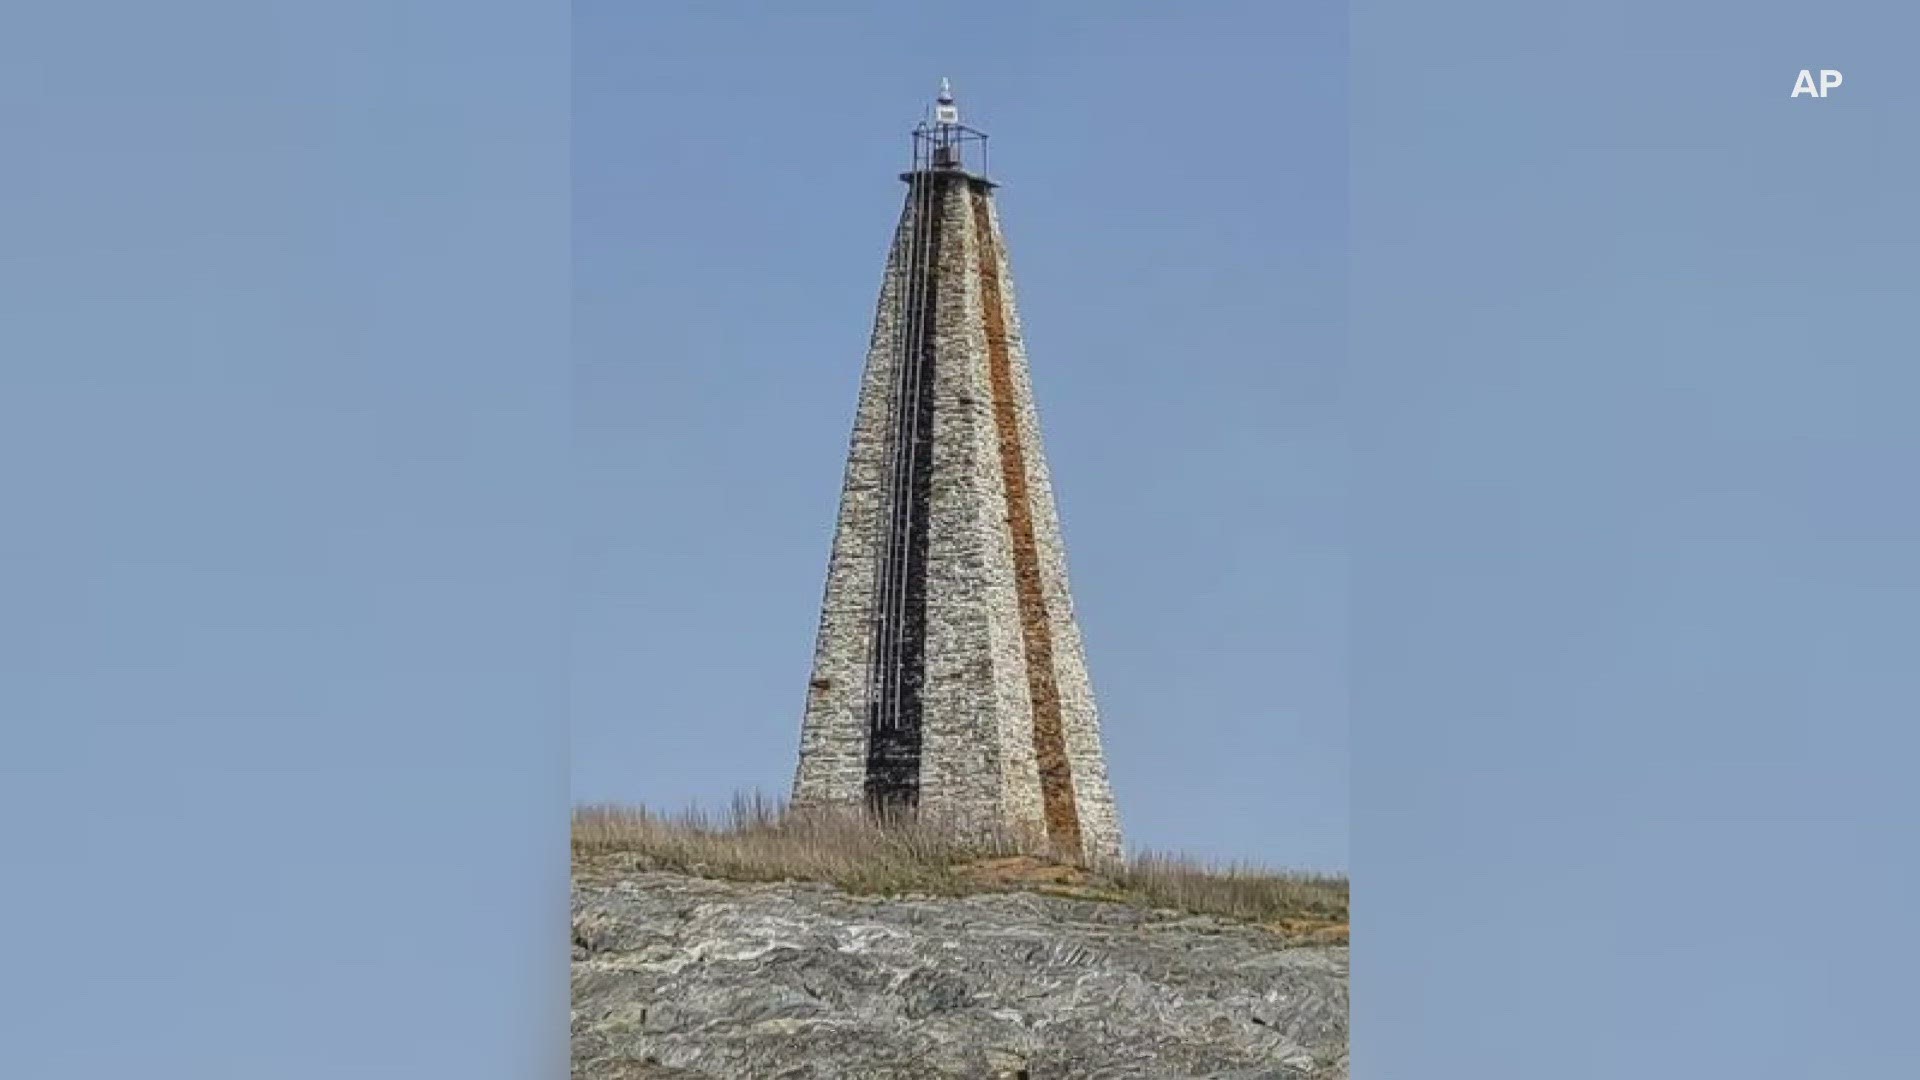 The Portland Press Herald reported town officials in Harpswell are considering acquiring the historic, pyramid-shaped lighthouse off the coast.